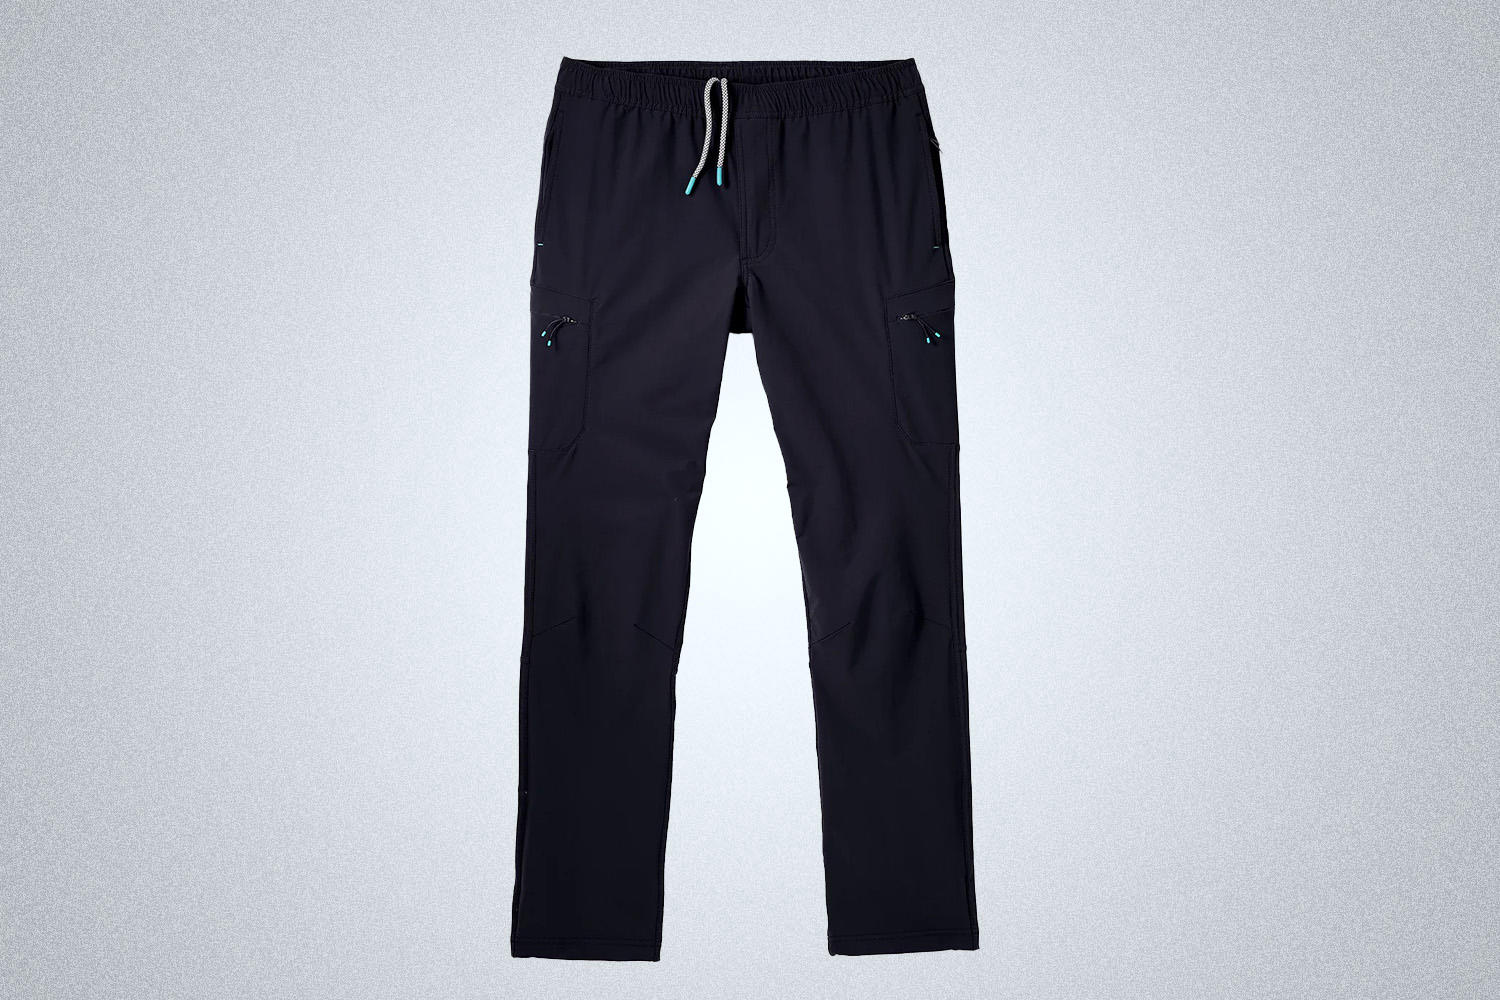 A pair of black All Terrain Everyday Pants from the Myles Apparel Sale on a grey background